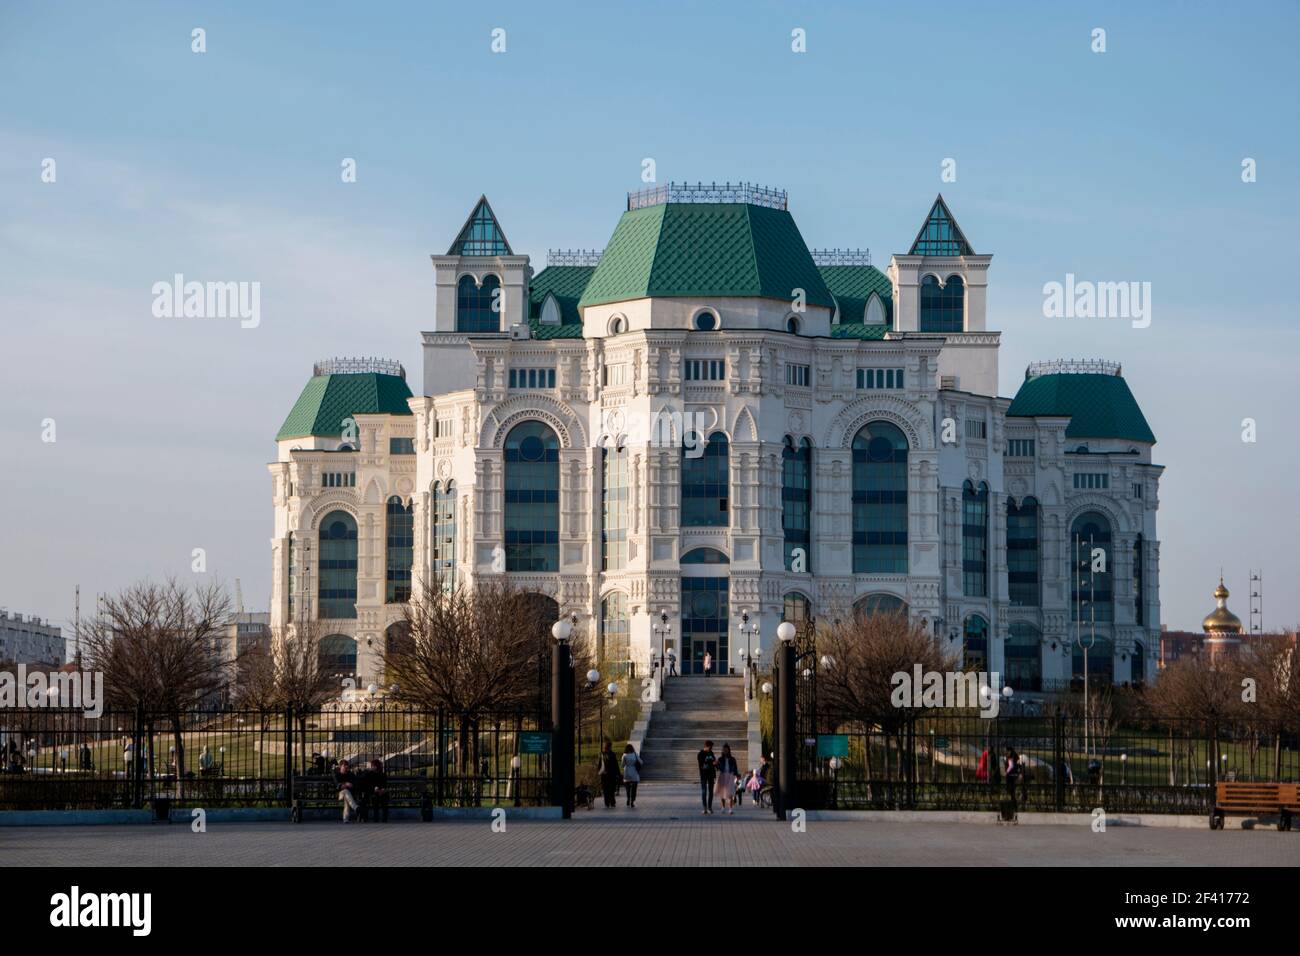 Astrakhan, Russia 12 of April 2018: Front View Of New Astrakhan Opera Theater In Sunny Spring Day With People Walking.. Astrakhan, Russia 12 of April 2018: New Astrakhan Opera Theater In Sunny Spring Day With People Walking. Stock Photo